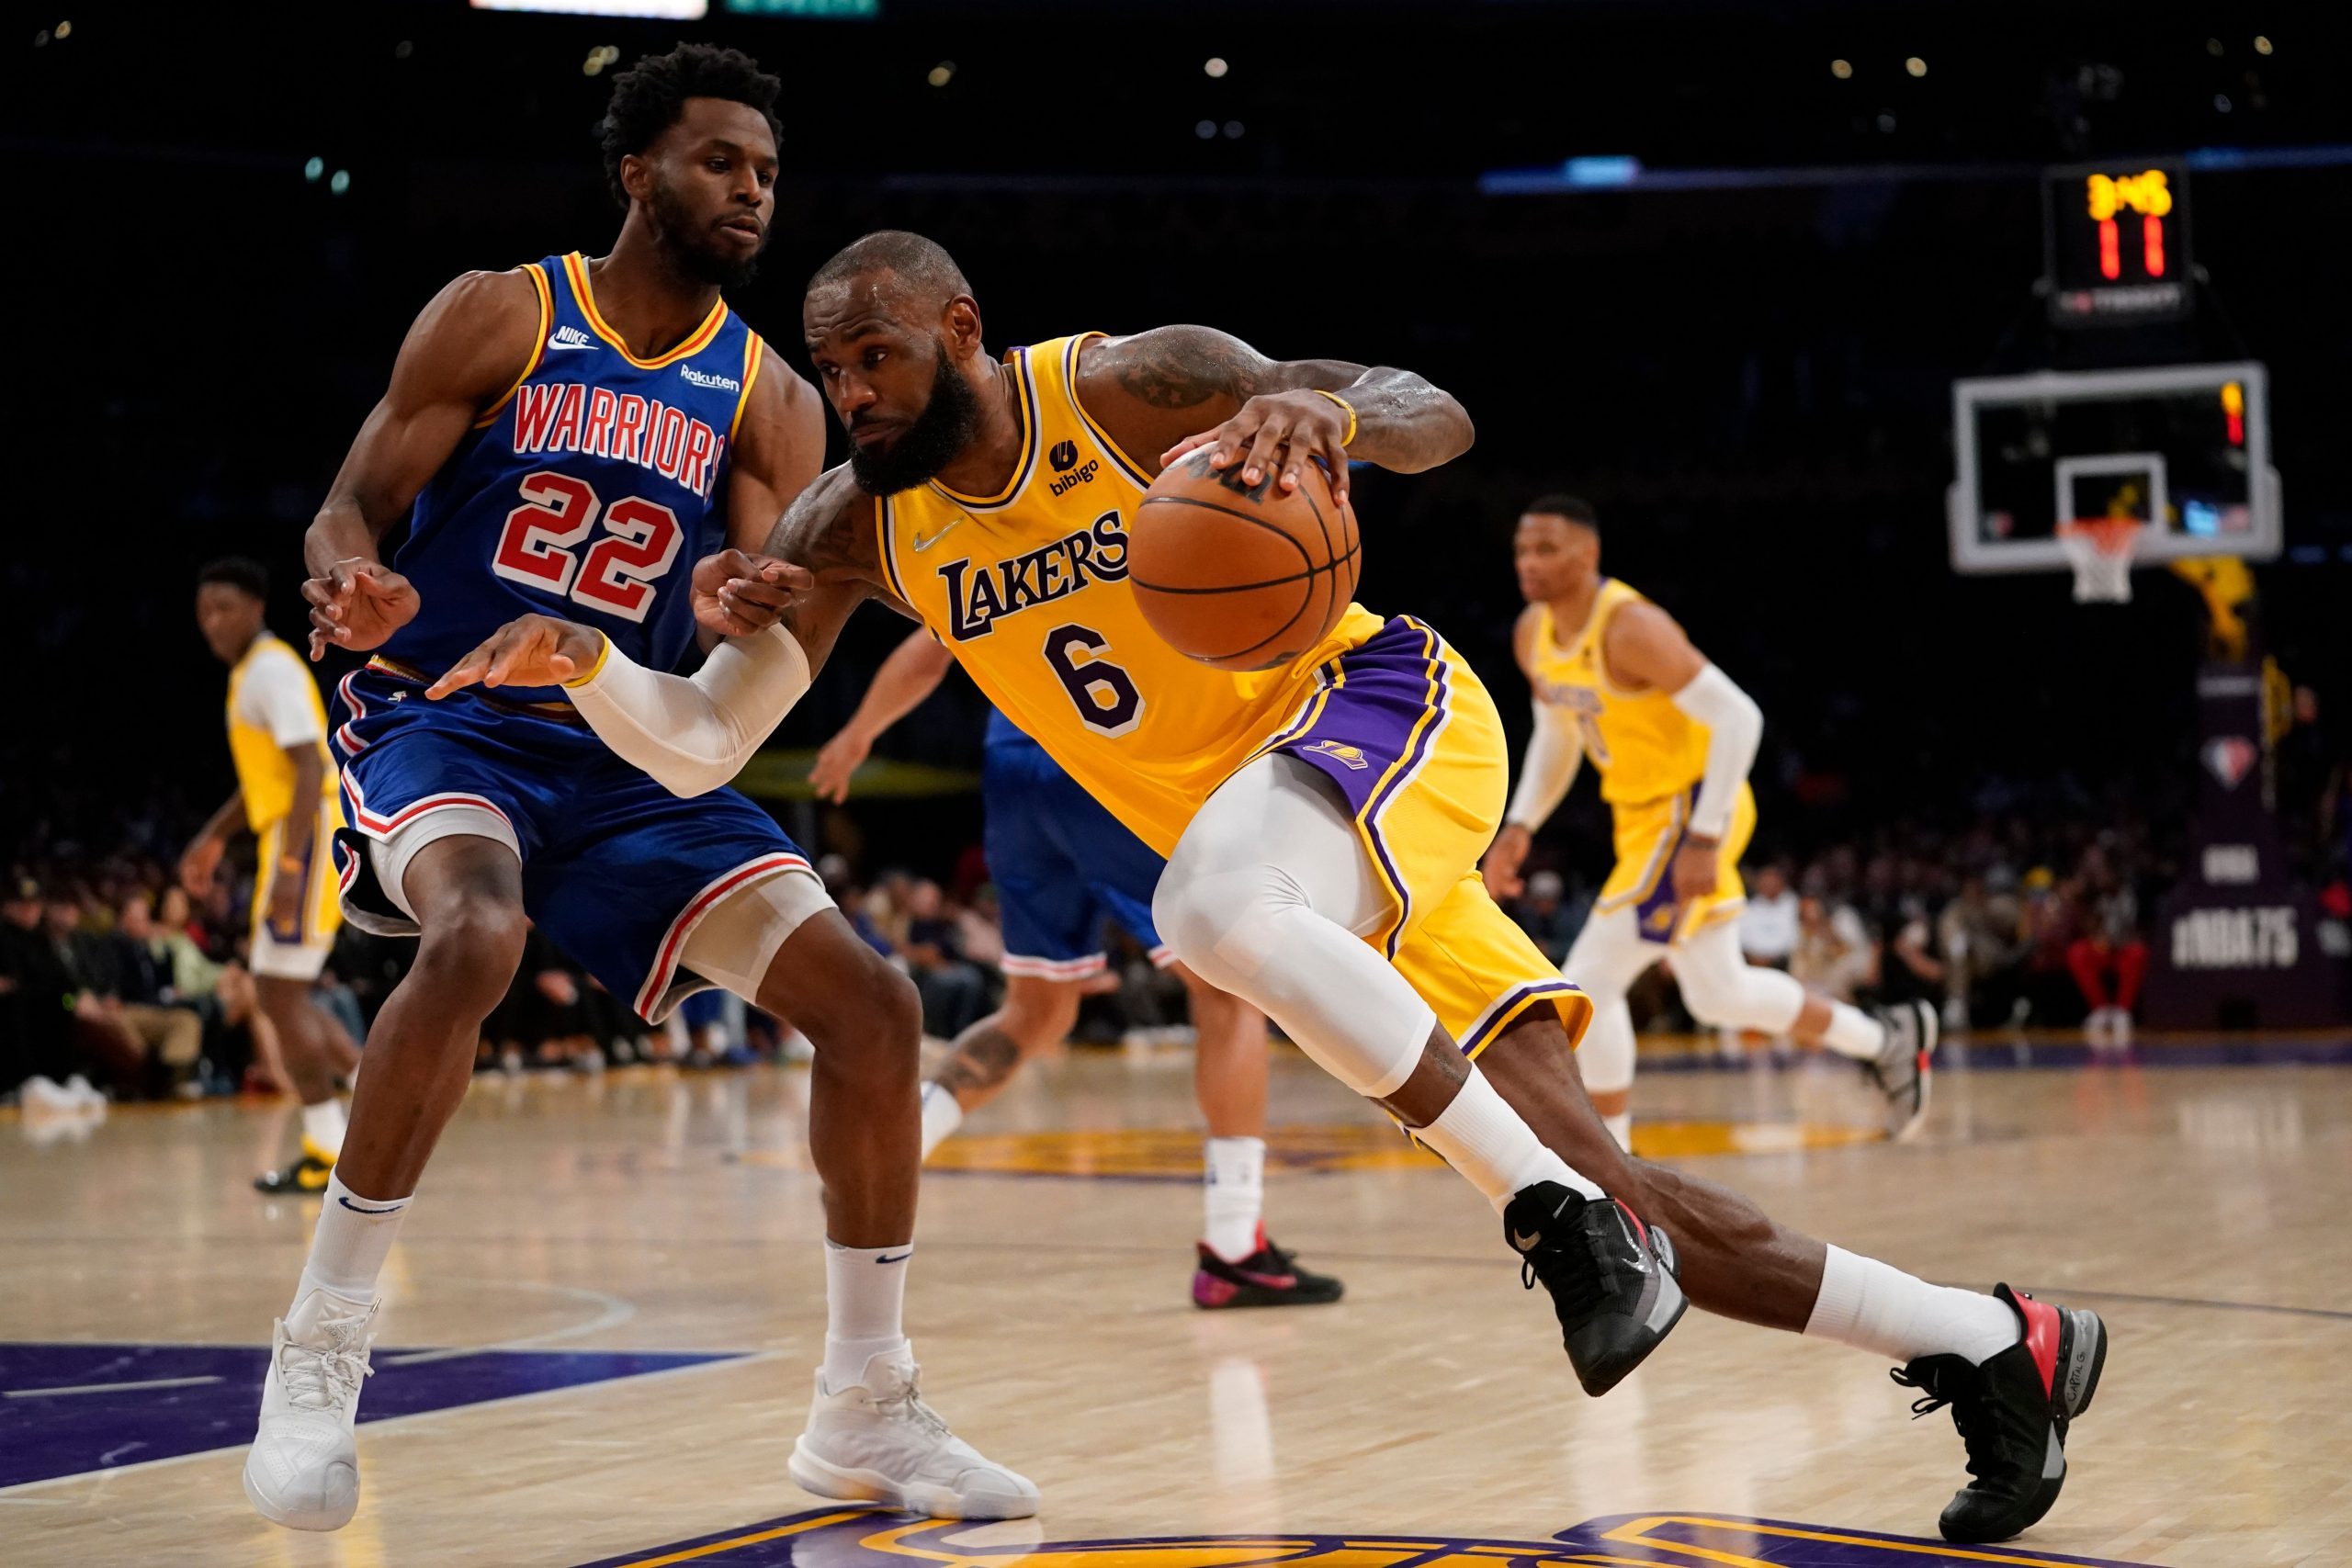 NBA: LeBron James scores 56 points, Los Angeles Lakers beat Golden State Warriors to end skid